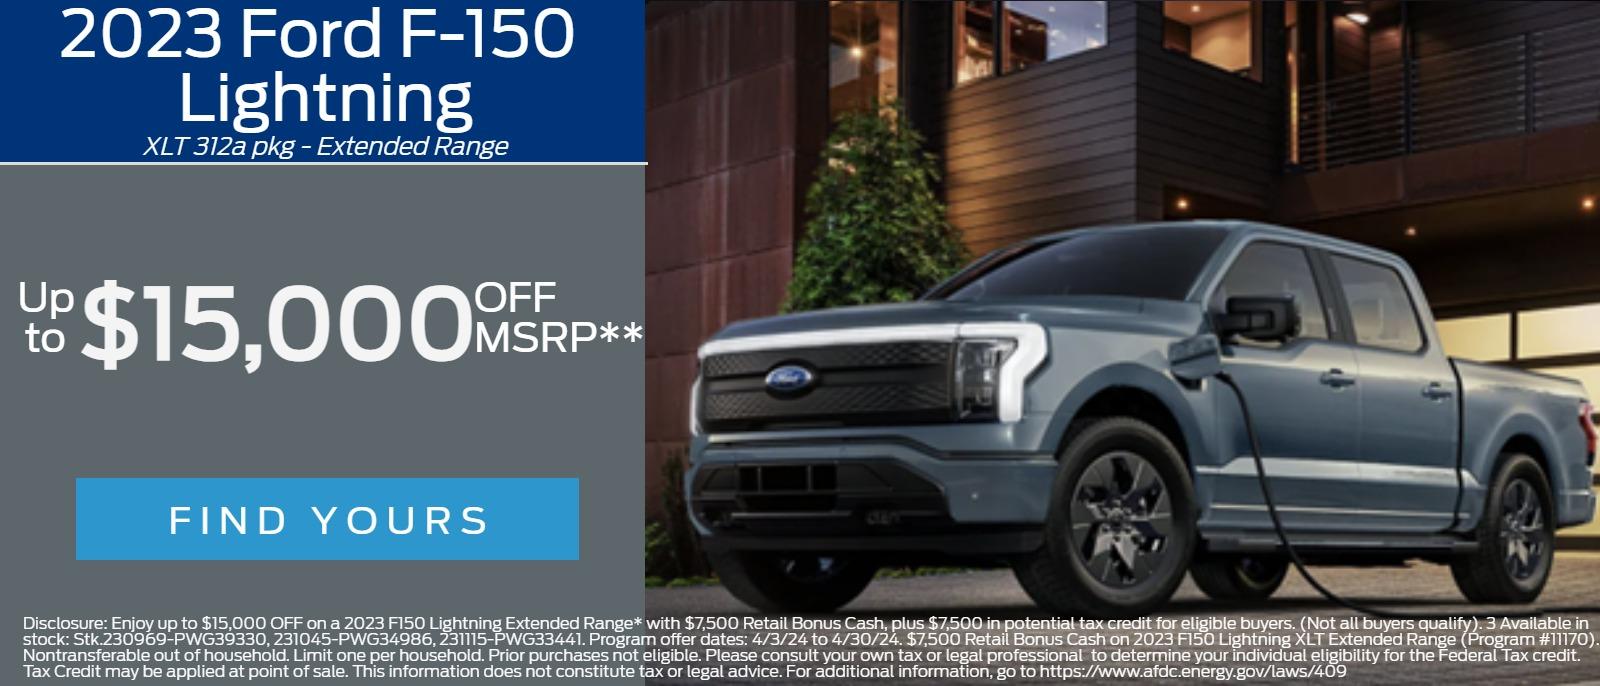 2023 Ford F-150 Lightning 
XLT 312a pkg - Extended Range 
Up to $15,000 OFF MSRP**
 
Disclosure: Enjoy up to $15,000 OFF on a 2023 F150 Lightning Extended Range* with $7,500 Retail Bonus Cash, plus $7,500 in potential tax credit for eligible buyers. (Not all buyers qualify). 3 Available in stock: Stk.230969-PWG39330, 231045-PWG34986, 231115-PWG33441.
Program offer dates: 4/3/24 to 4/30/24. $7,500 Retail Bonus Cash on 2023 F150 Lightning XLT Extended Range (Program #11170). Nontransferable out of household. Limit one per household. Prior purchases not eligible. Please consult your own tax or legal professional  to determine your individual eligibility for the Federal Tax credit. Tax Credit may be applied at point of sale. This information does not constitute tax or legal advice. For additional information, go to https://www.afdc.energy.gov/laws/409